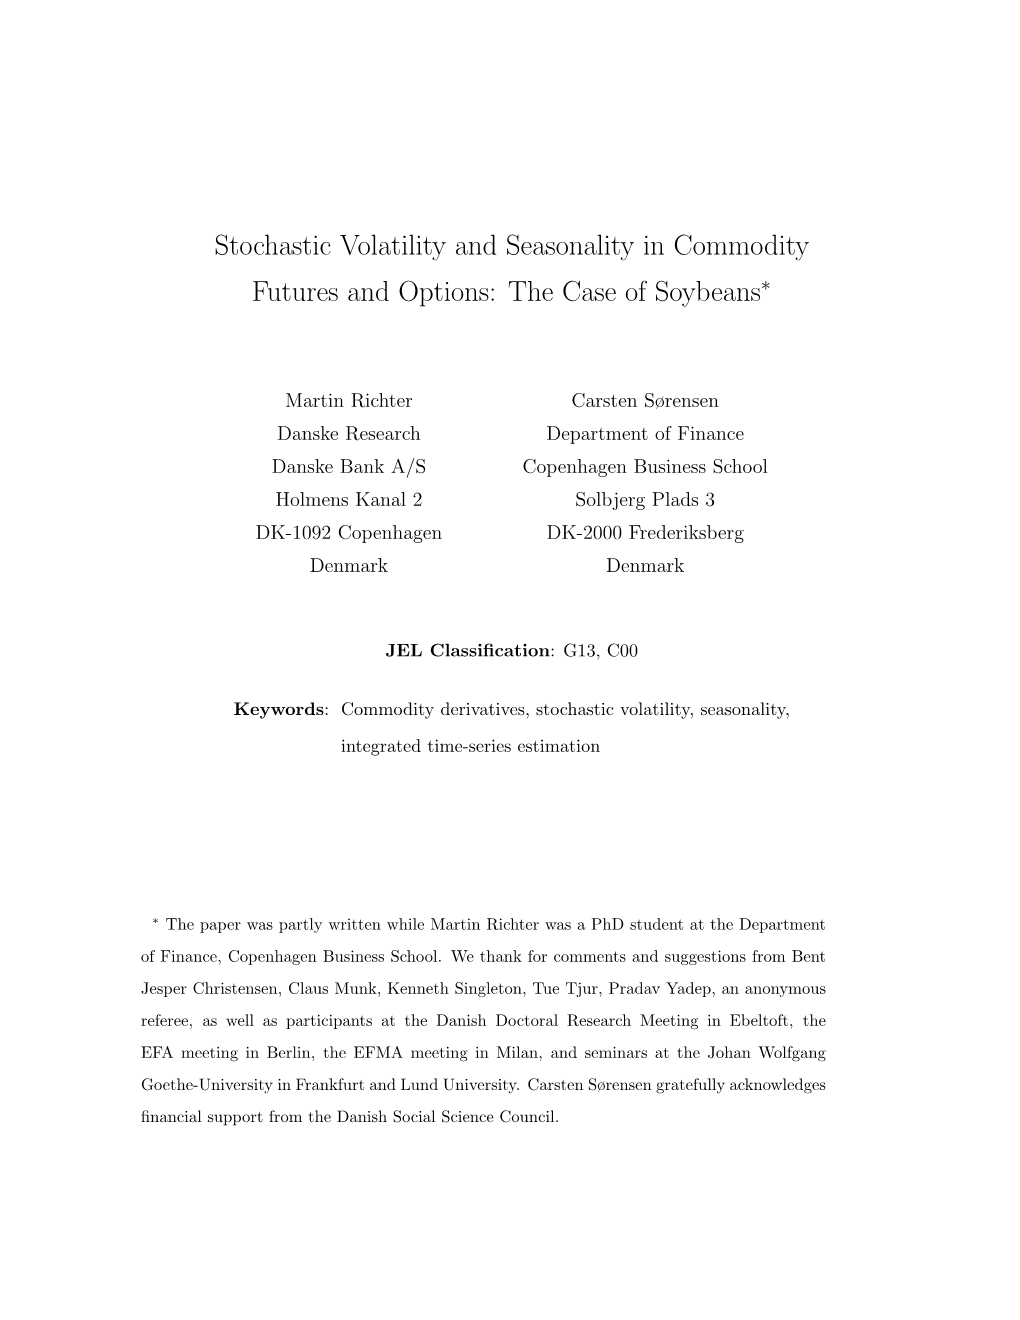 Stochastic Volatility and Seasonality in Commodity Futures and Options: the Case of Soybeans